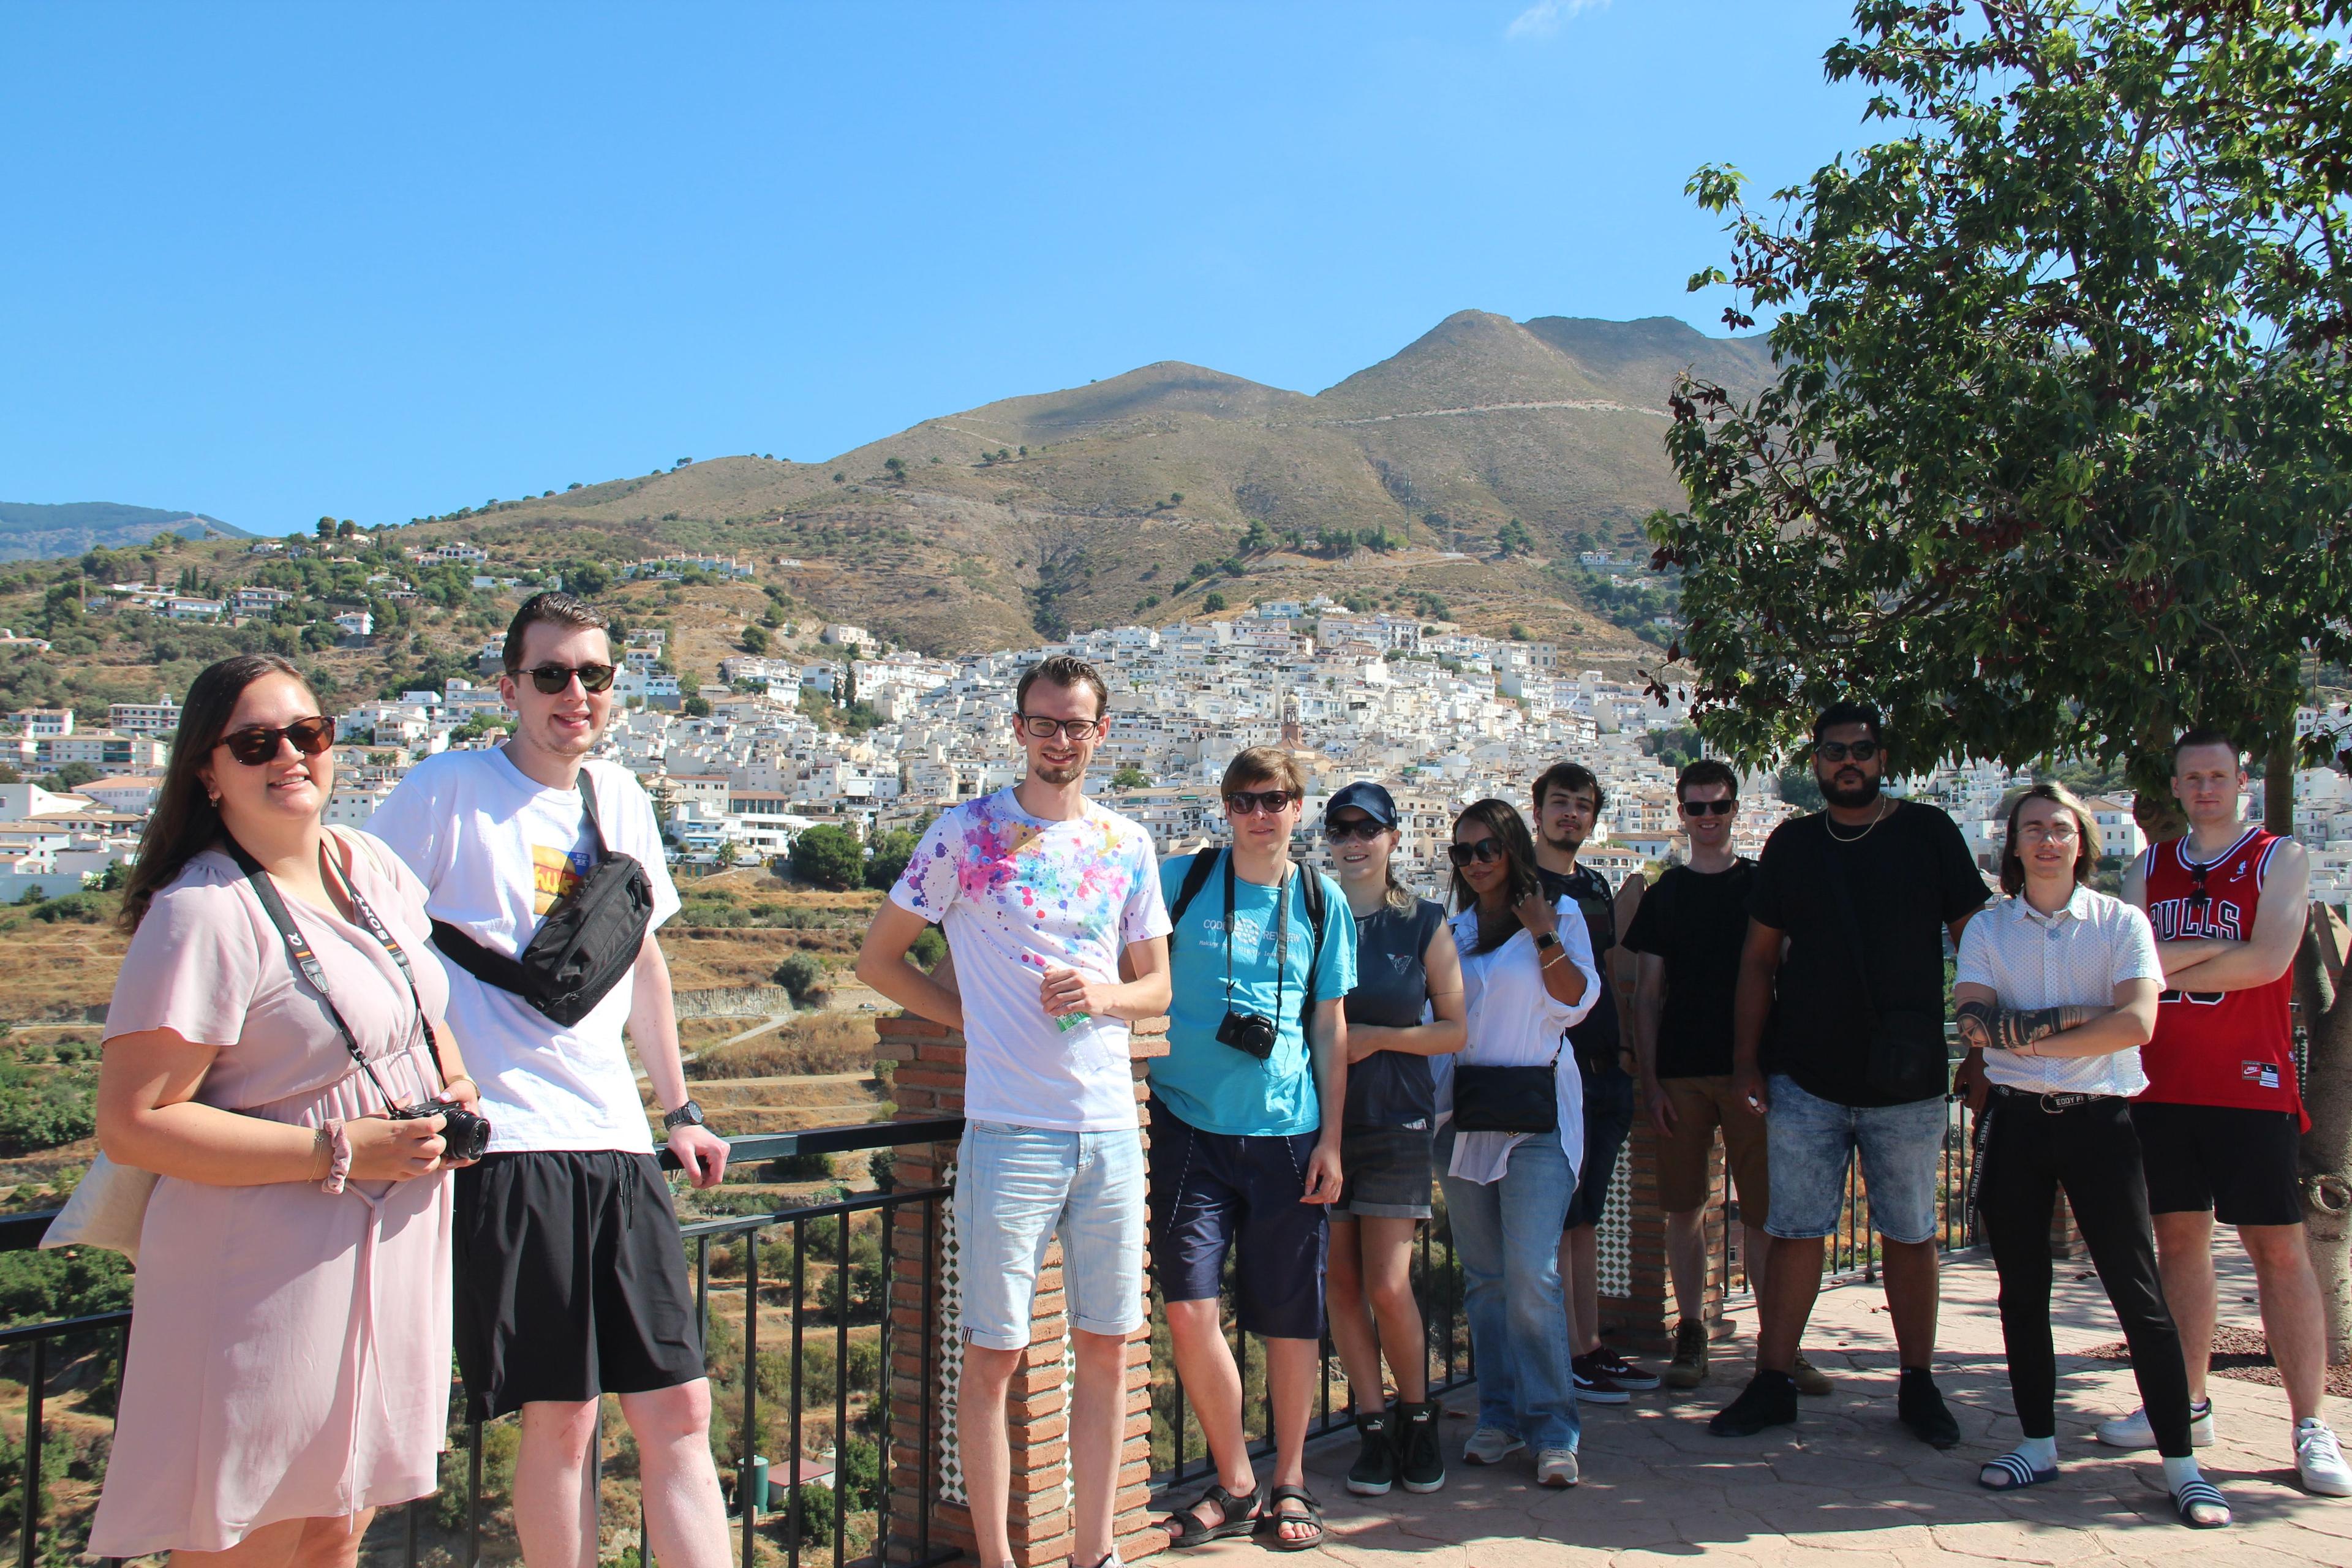 Group photo of Competa IT colleagues, during vacation in Spain